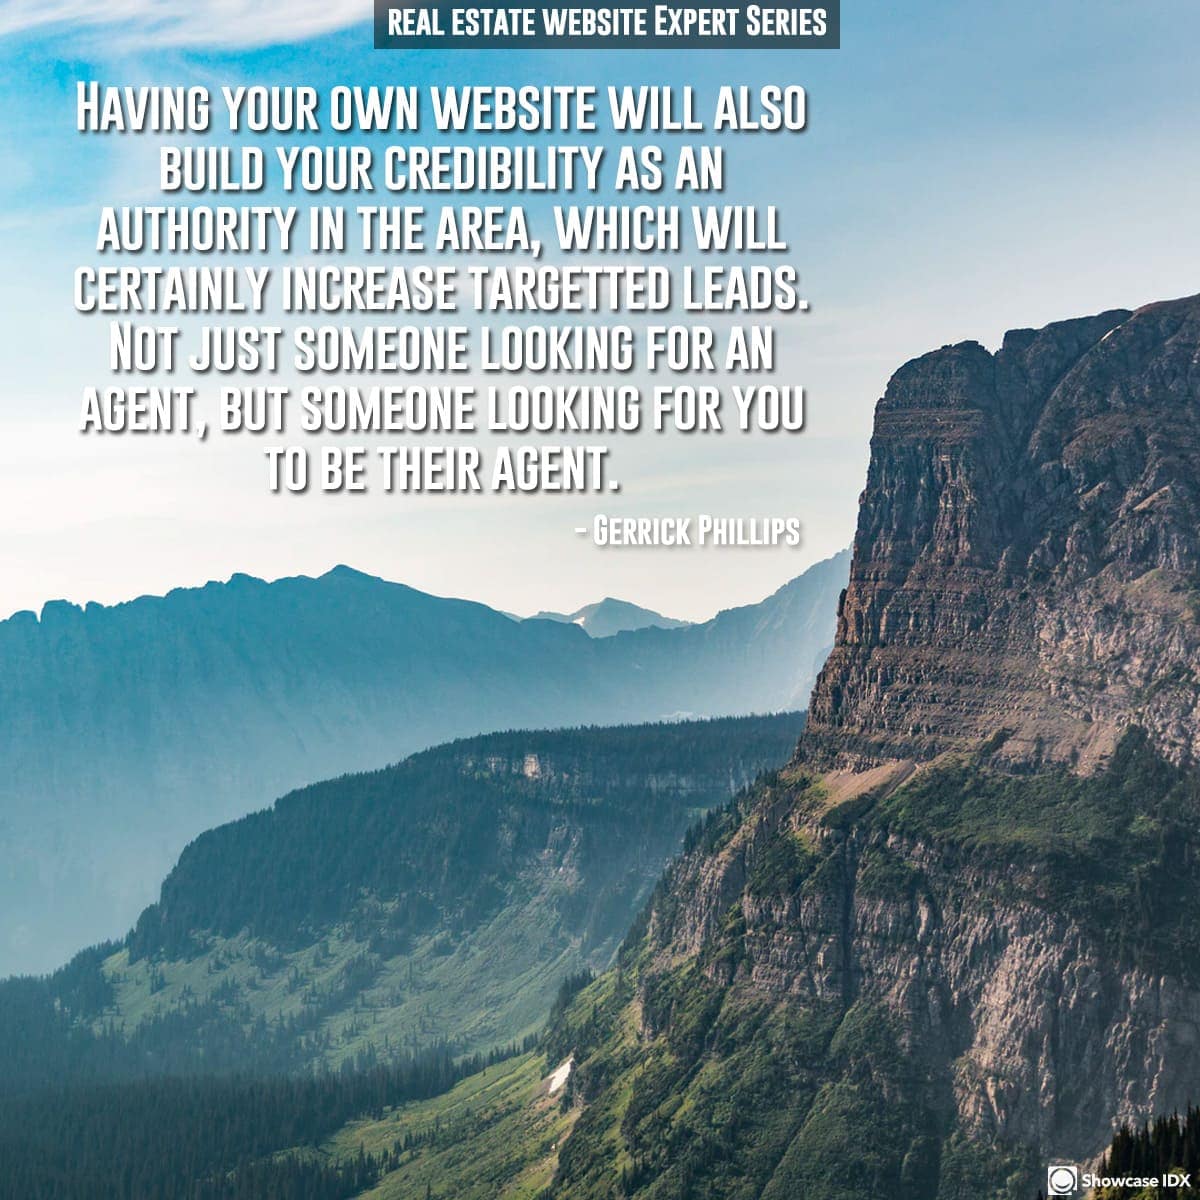 Having your own website will also build your credibility as an authority in the area, which will certainly increase targetted leads. Not just someone looking for an agent, but someone looking for you to be their agent.